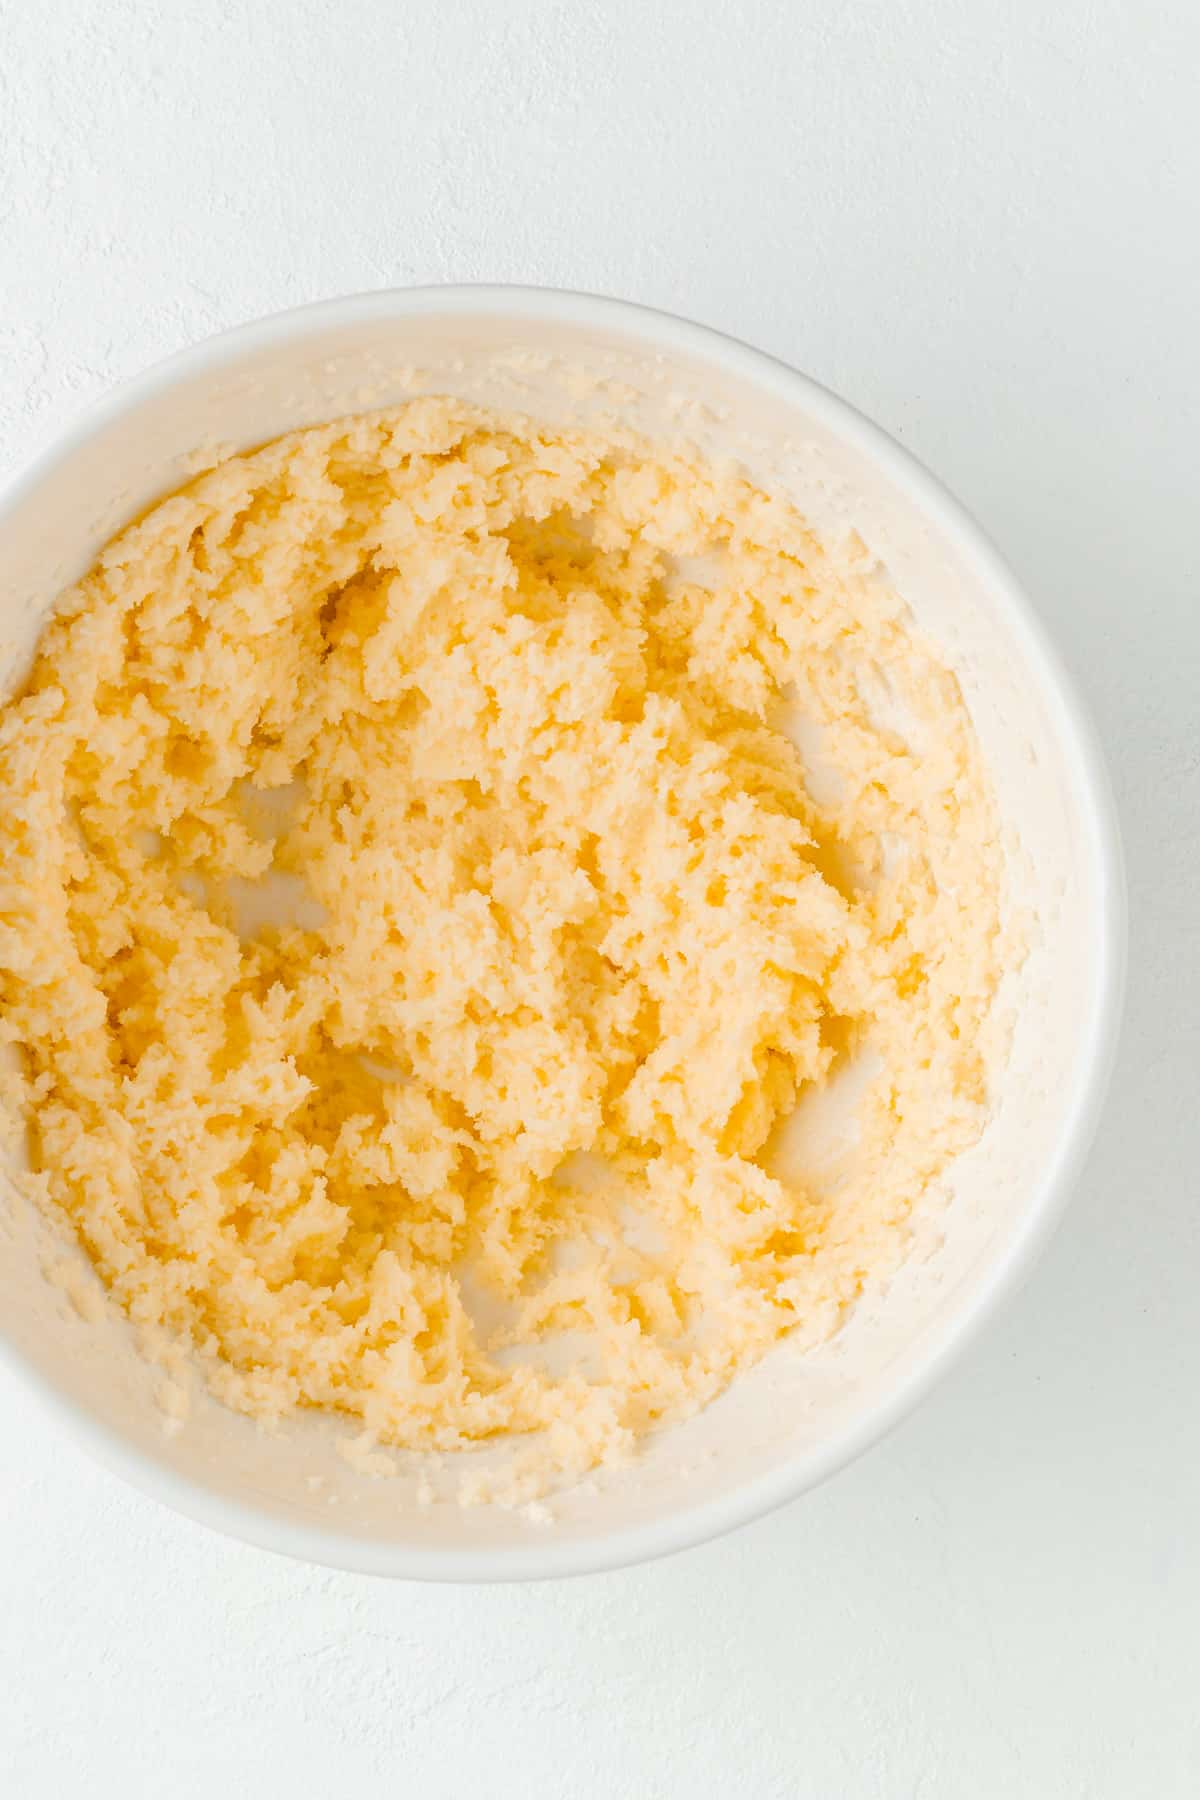 Creamed butter and sugar and white mixing bowl on white background.